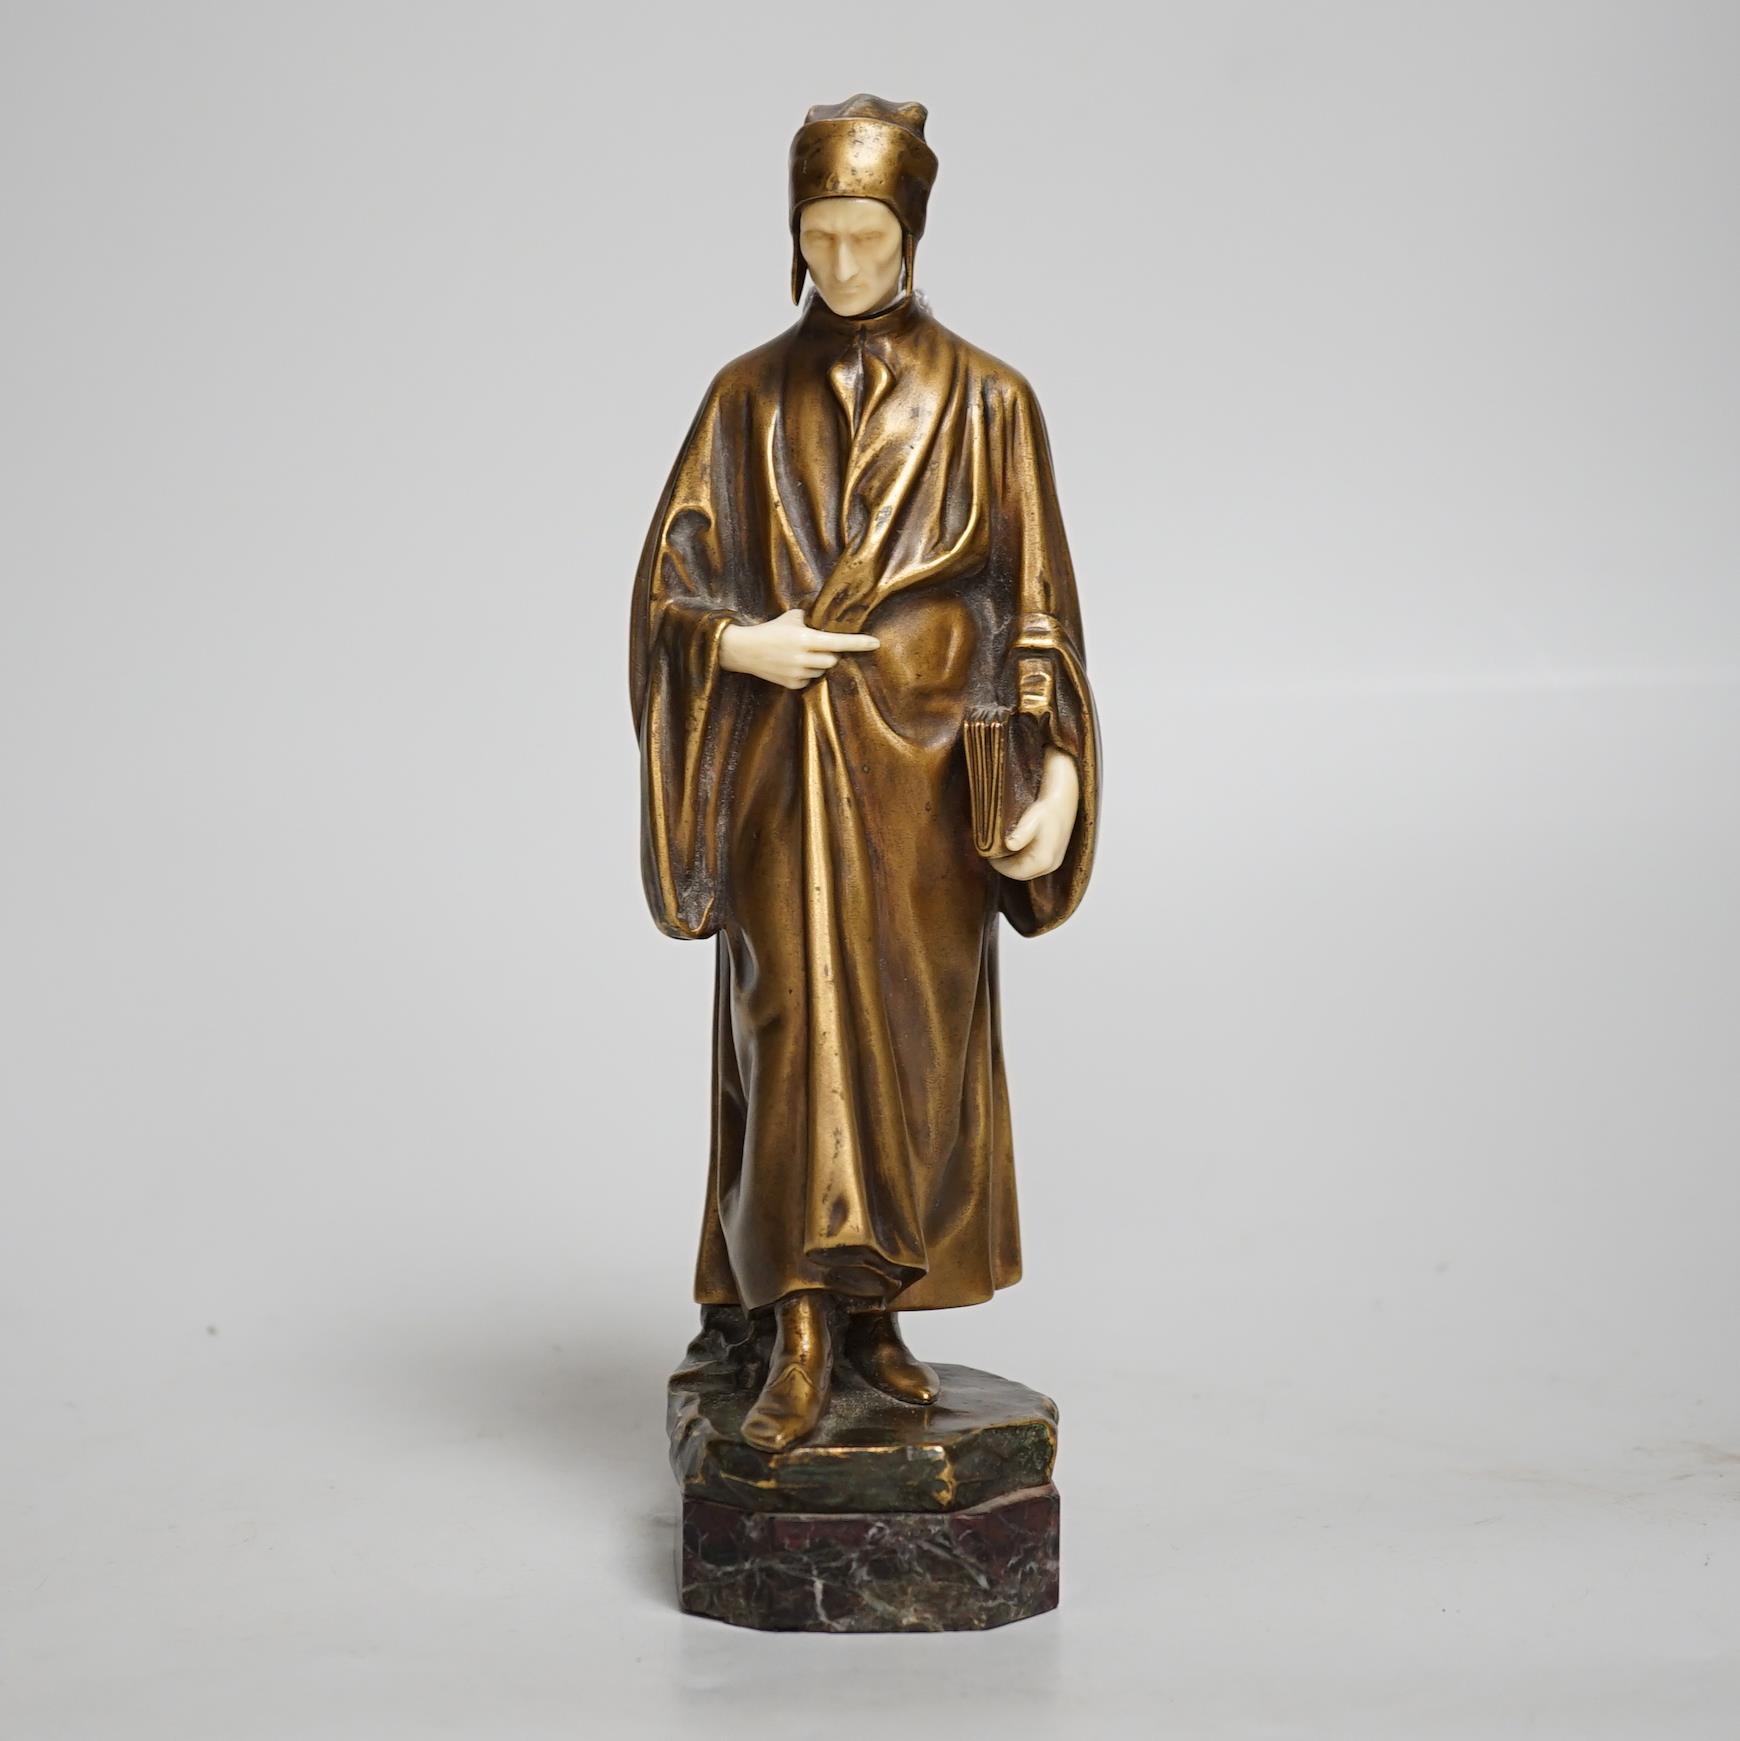 A. Faguelle. A bronze and ivory figure of Dante, c.1900, foundry Susse Frere Ed. Paris, 21cm high.